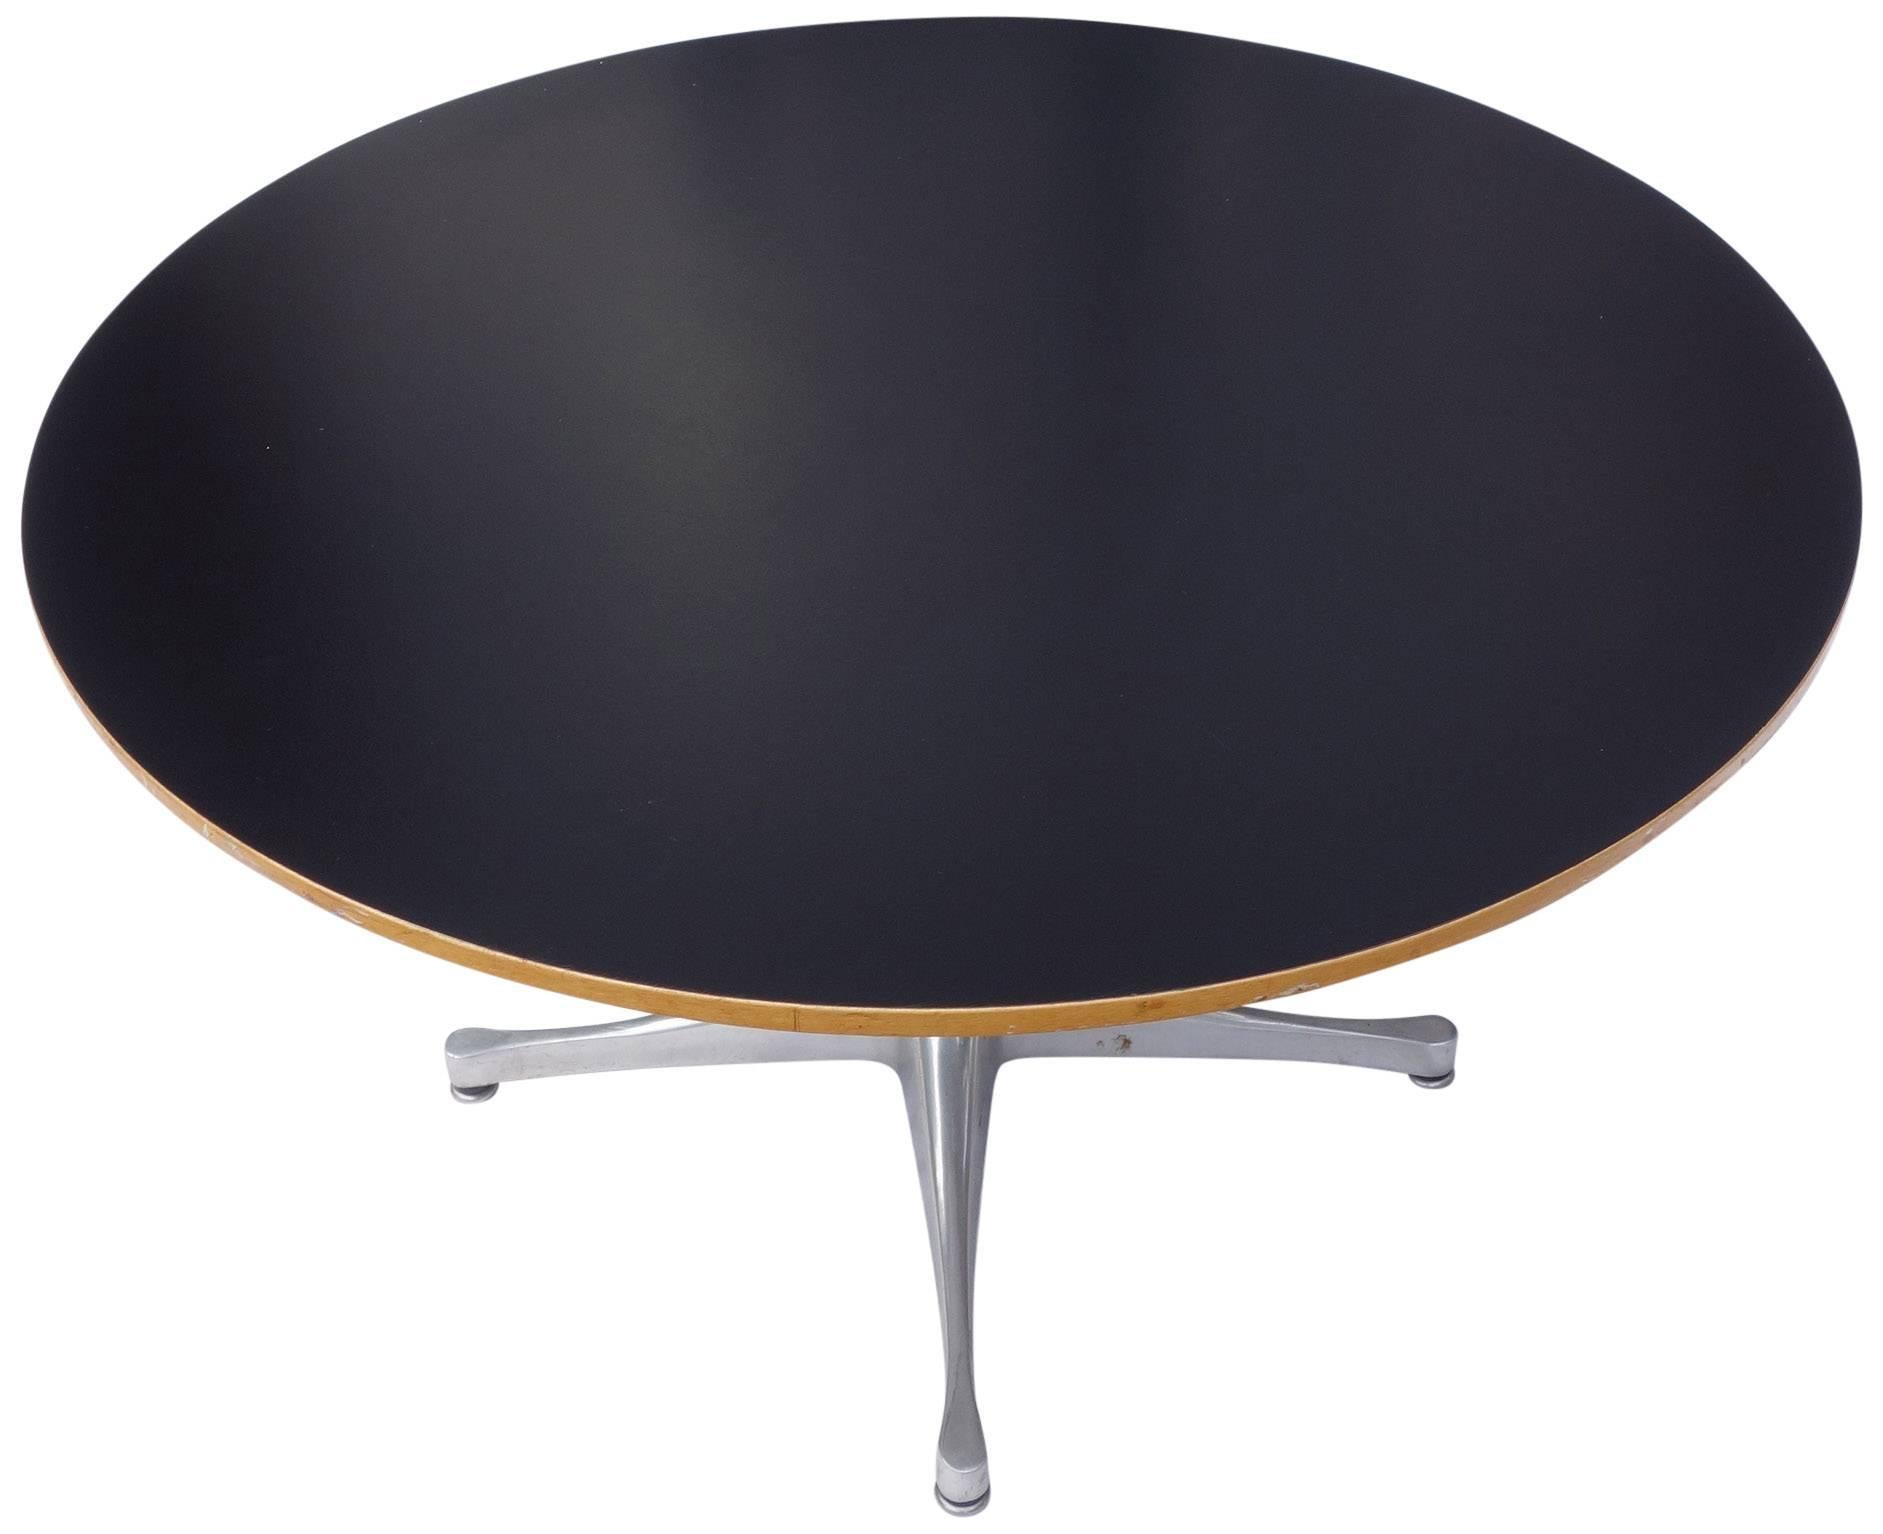 Elegant coffee table deigned by George Nelson for Herman Miller.